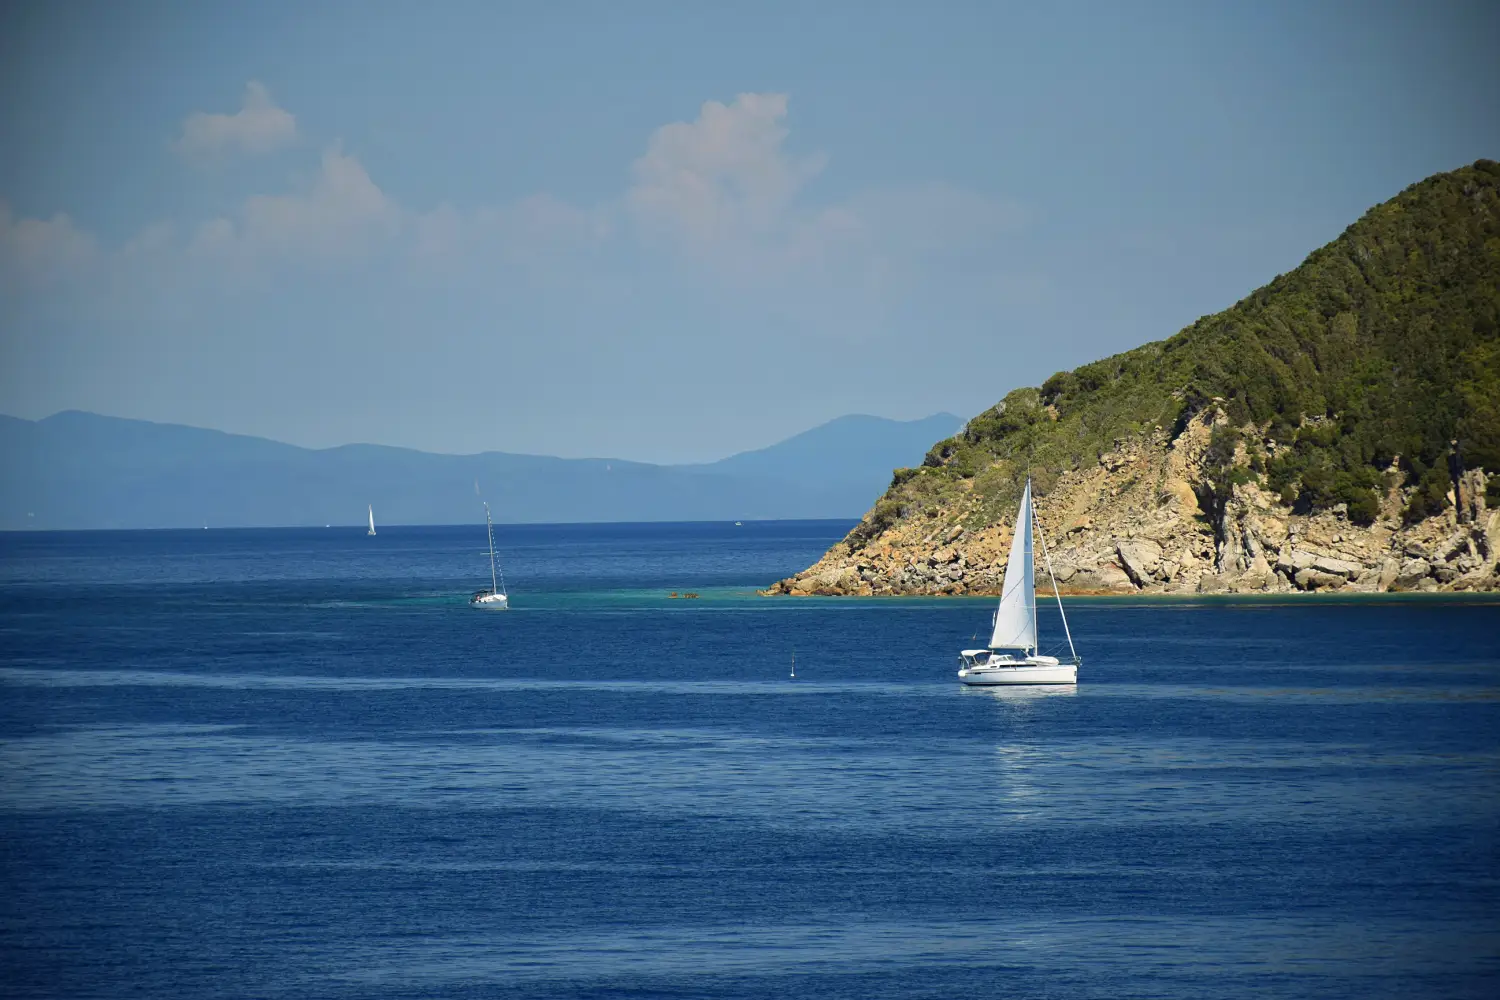 Ferry to Cavo - Sail boat rounding the north west promontory of Elba Island, Italy.